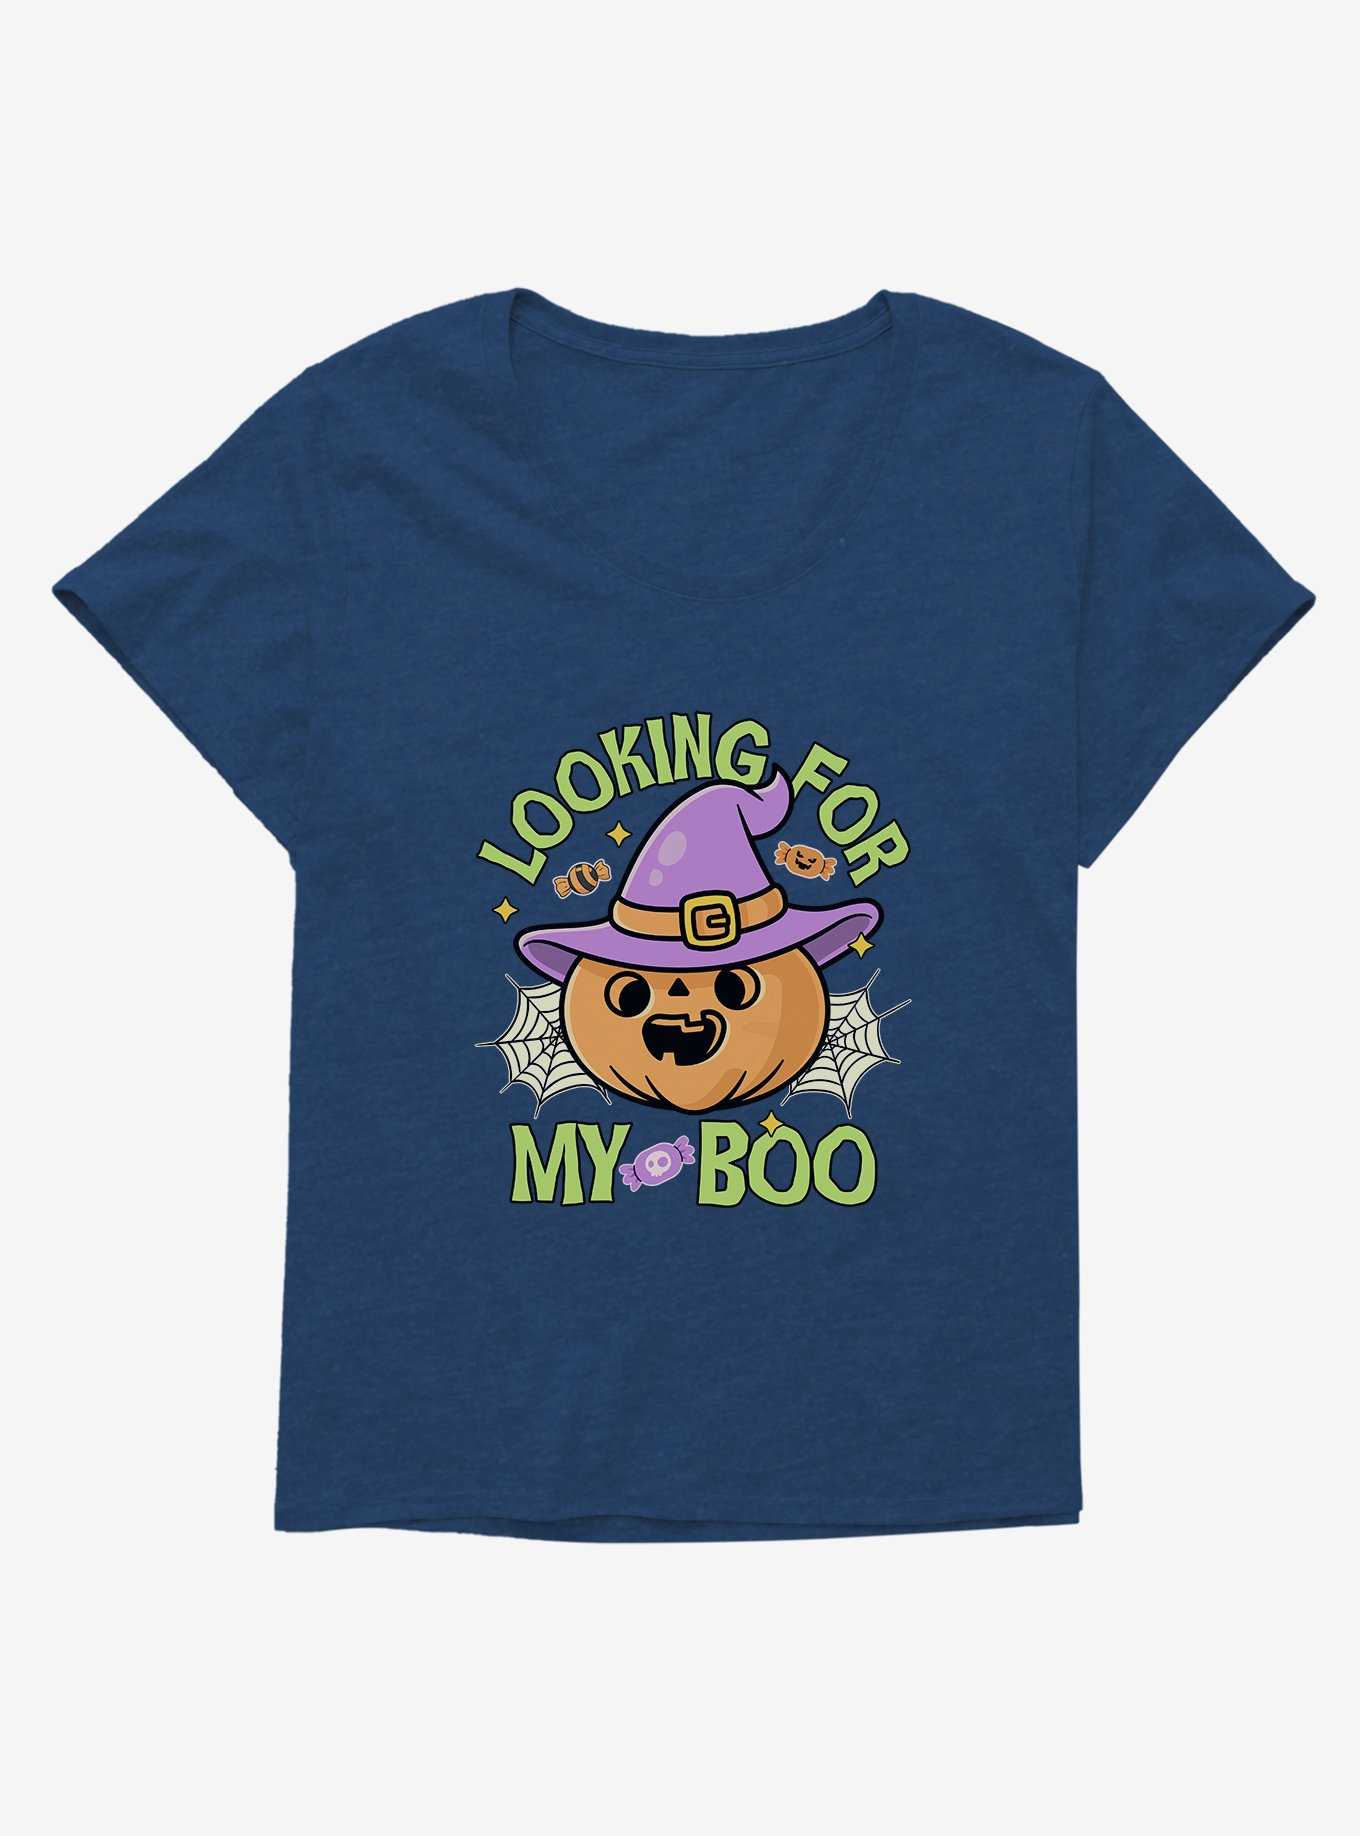 Halloween Looking For My Boo Girls Plus Size T-Shirt, , hi-res